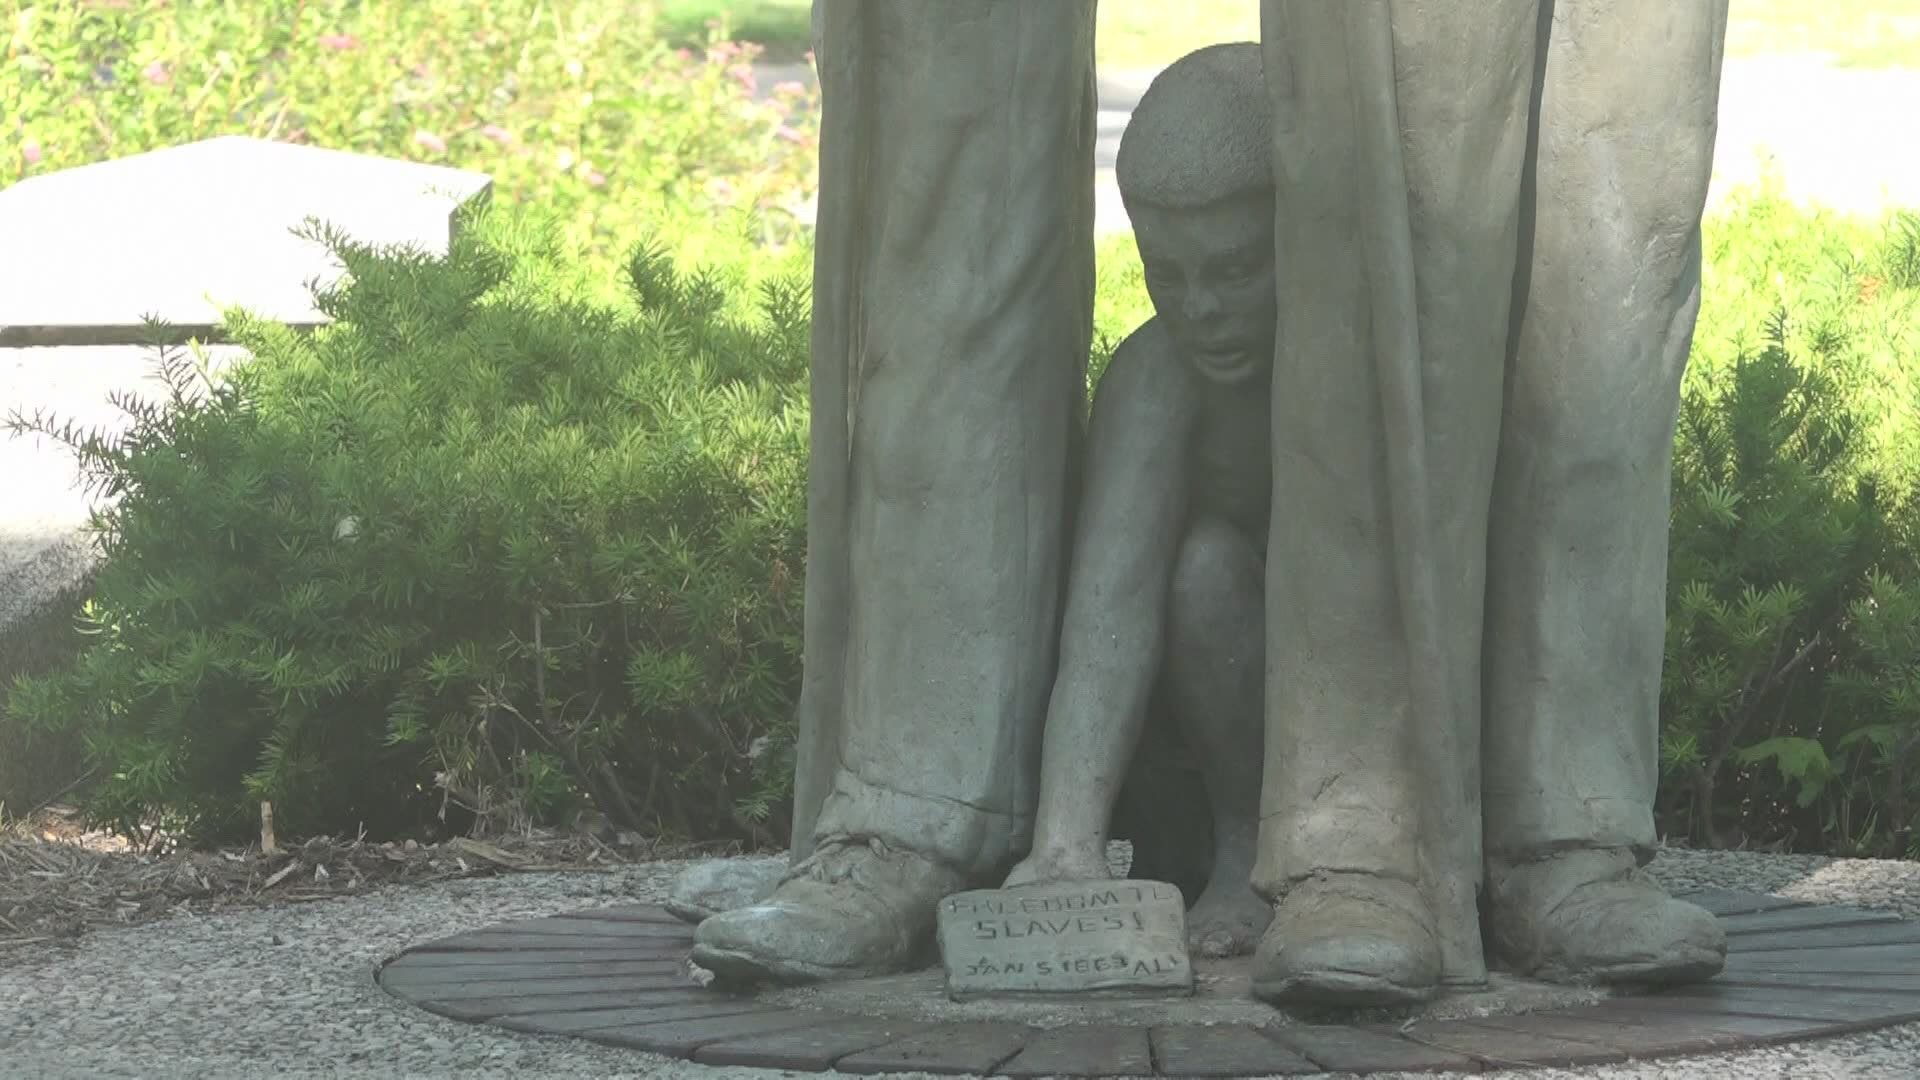 A group proposed removing parts of a statue that features a Union solider, a Confederate and an enslaved child.